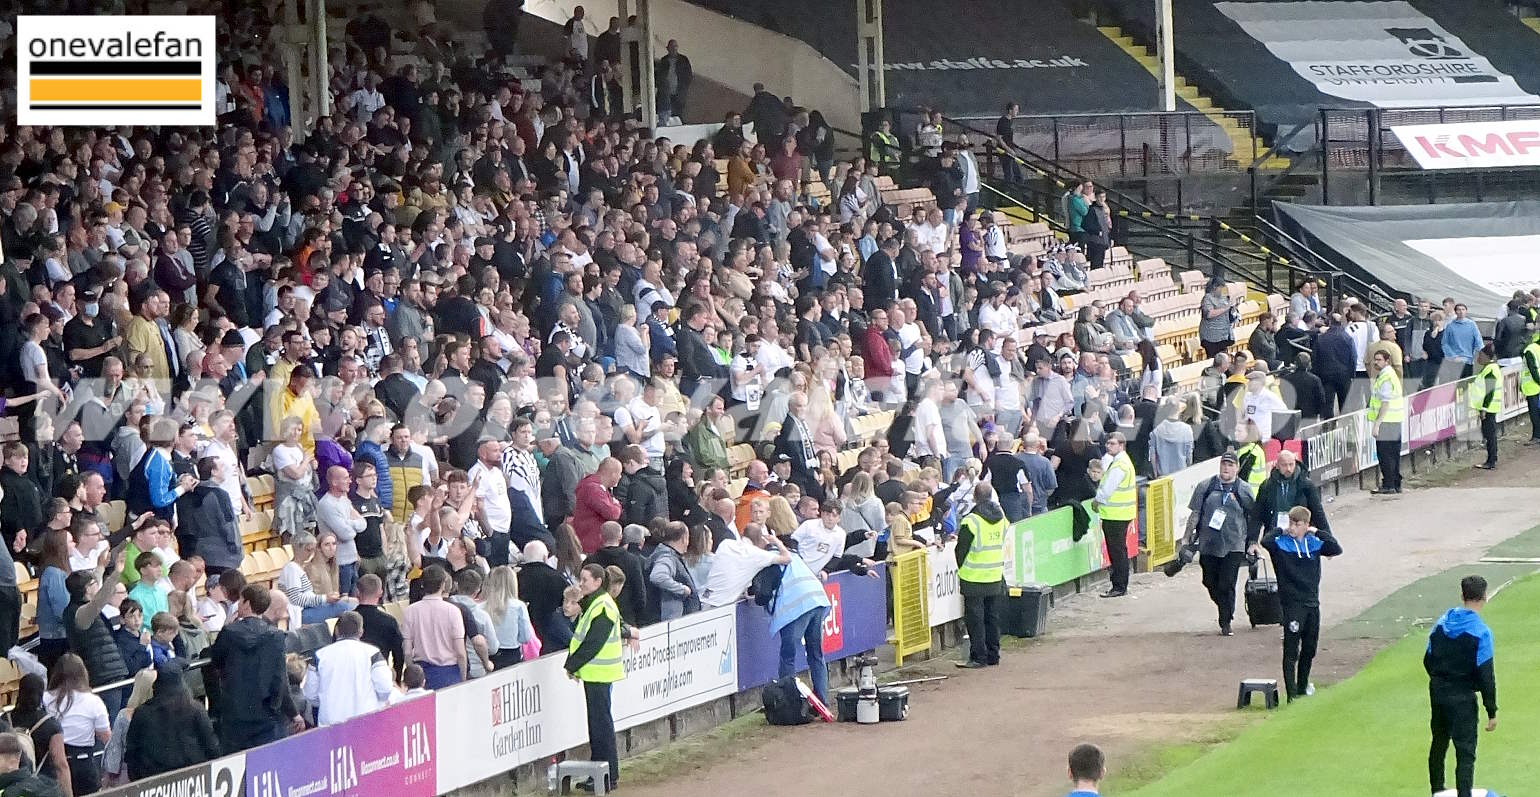 Port Vale fans during the play-off game against Swindon Town in 2022